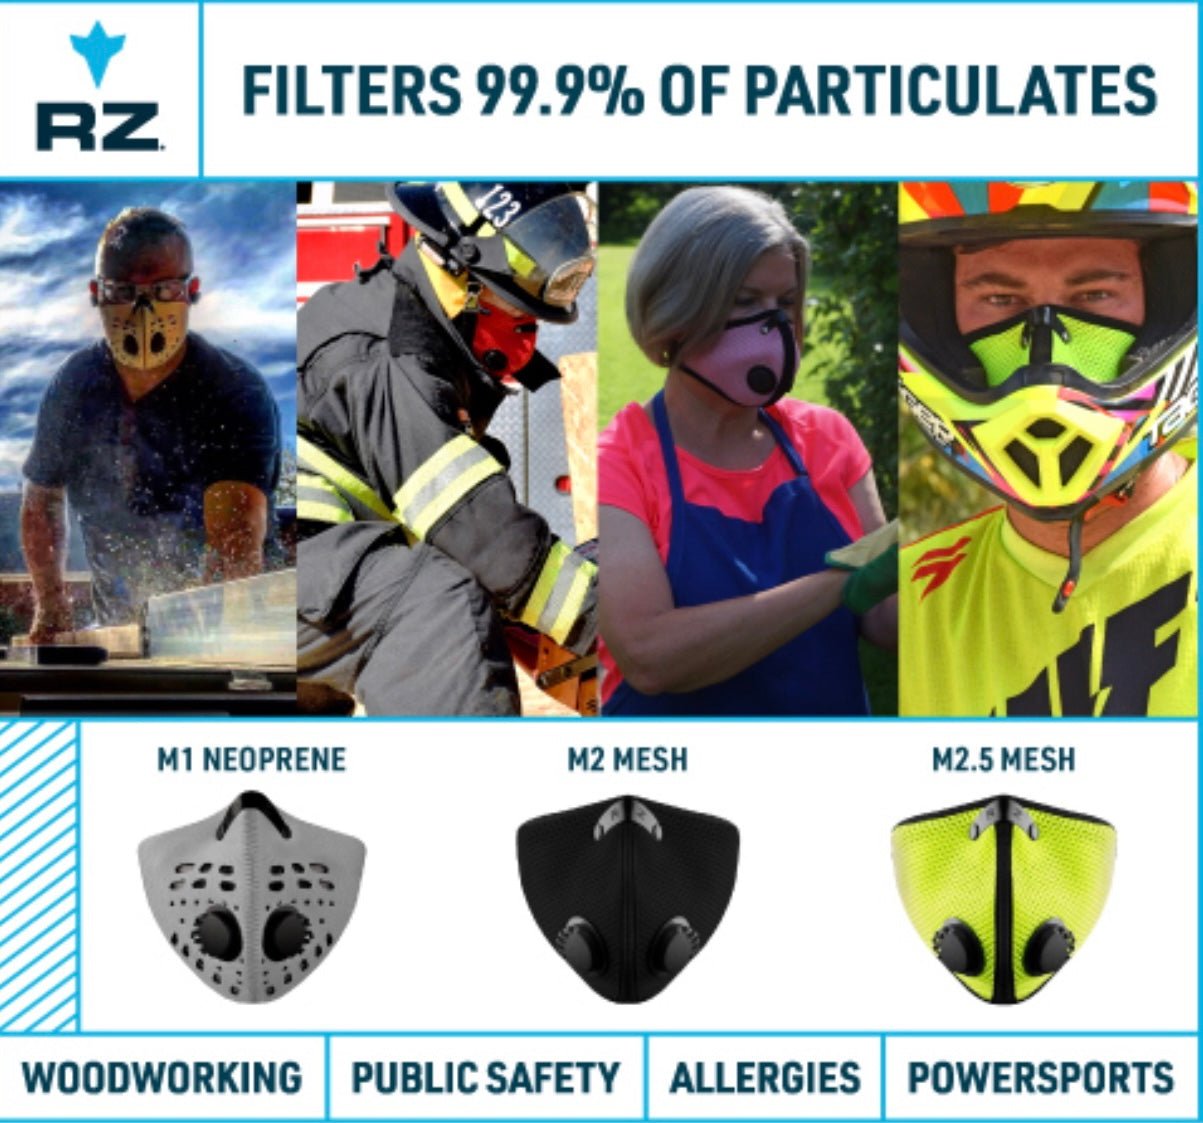 Homepage News - Deep Cleaning is a top priority - RZ Mask